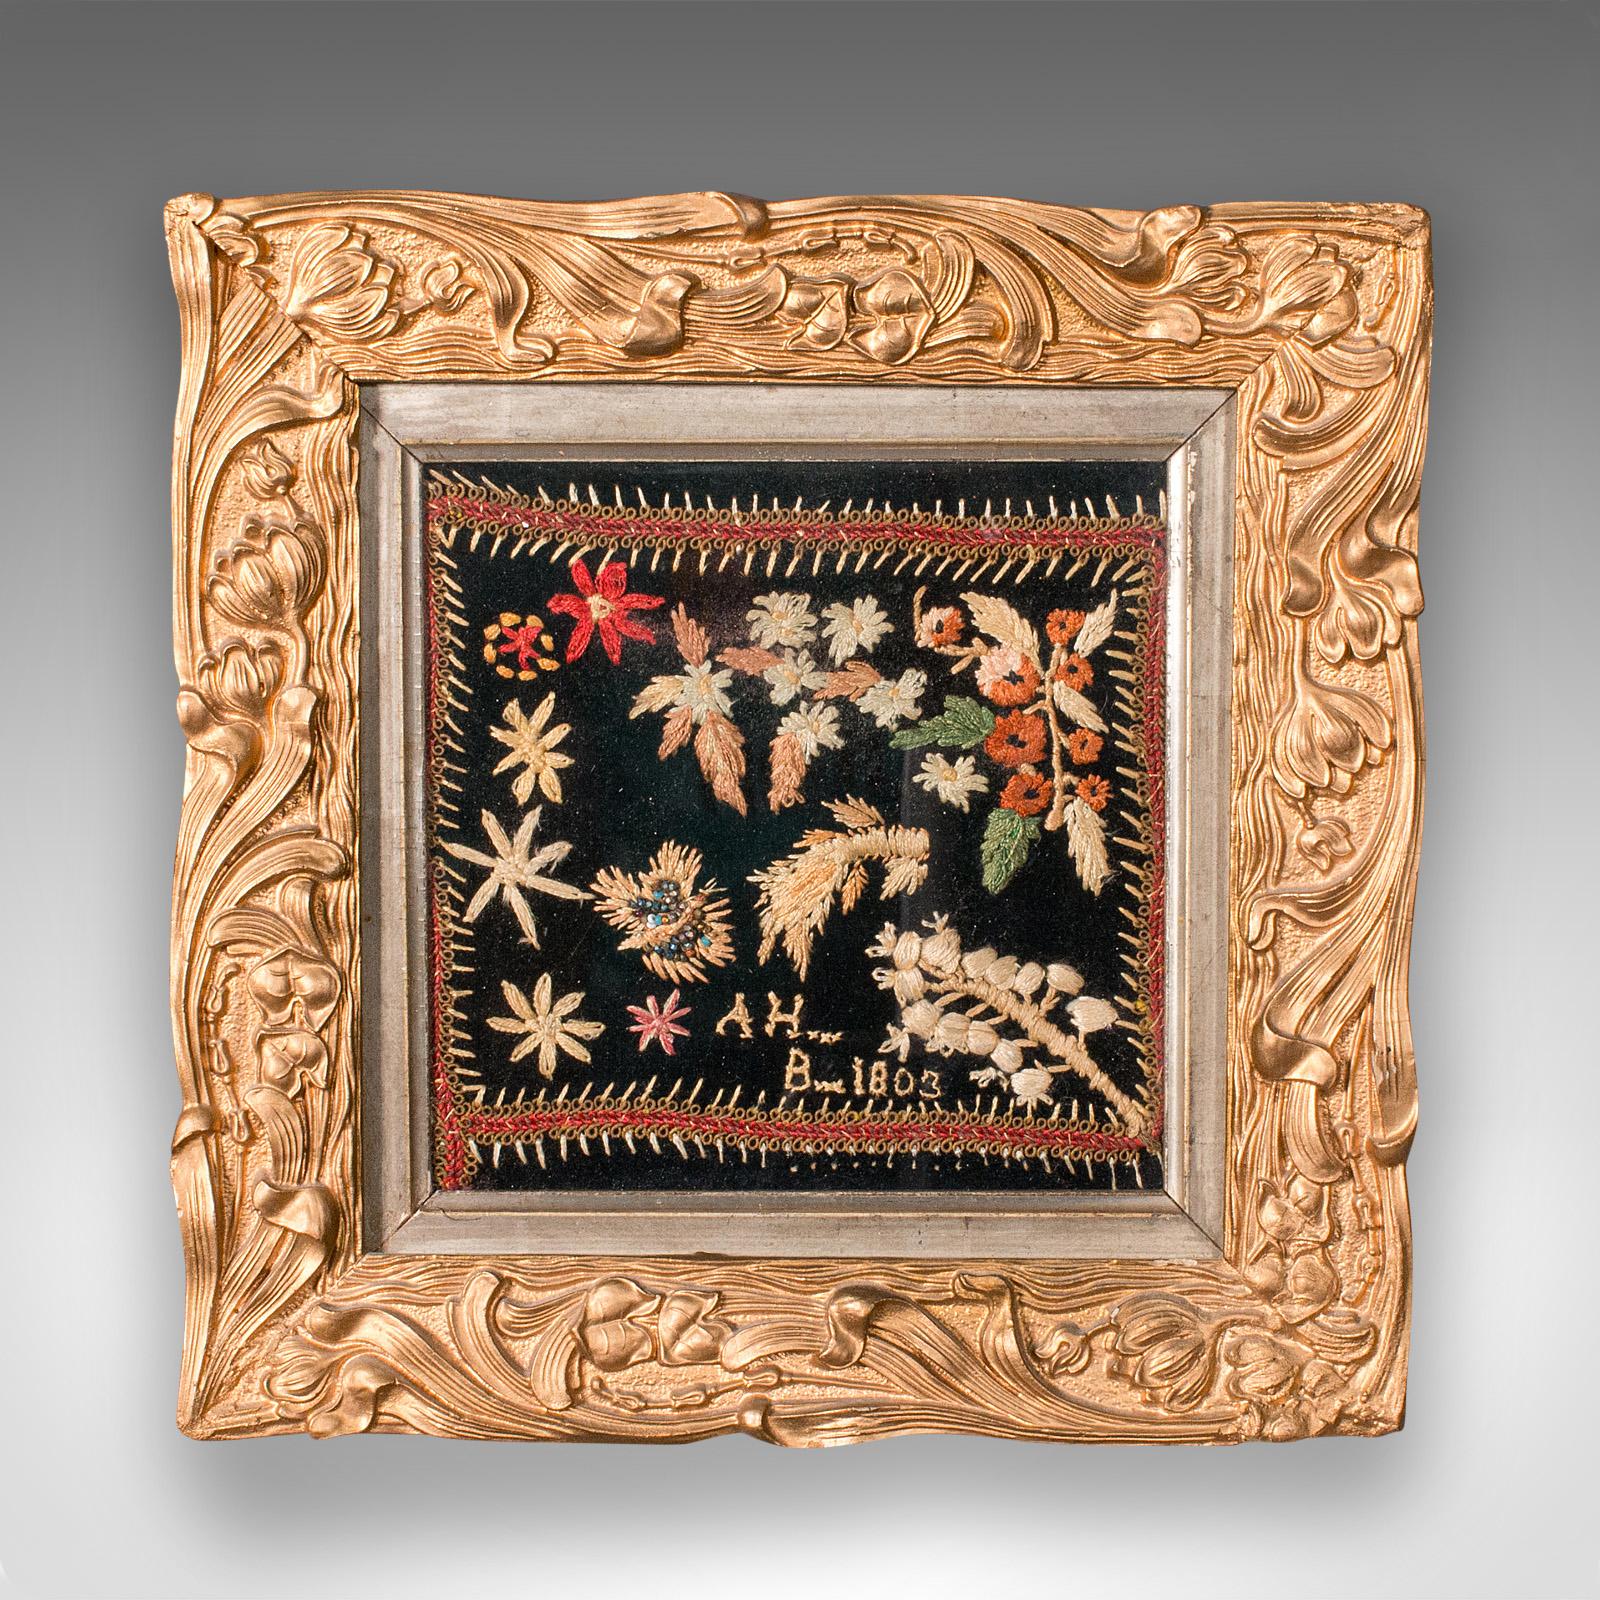 This is an antique framed embroidered sampler. An English, needlepoint tapestry in giltwood frame, dating to the Georgian period, circa 1800 and later.

Delightful antique tapestry, with a wonderfully naive appeal.
Displays a desirable aged